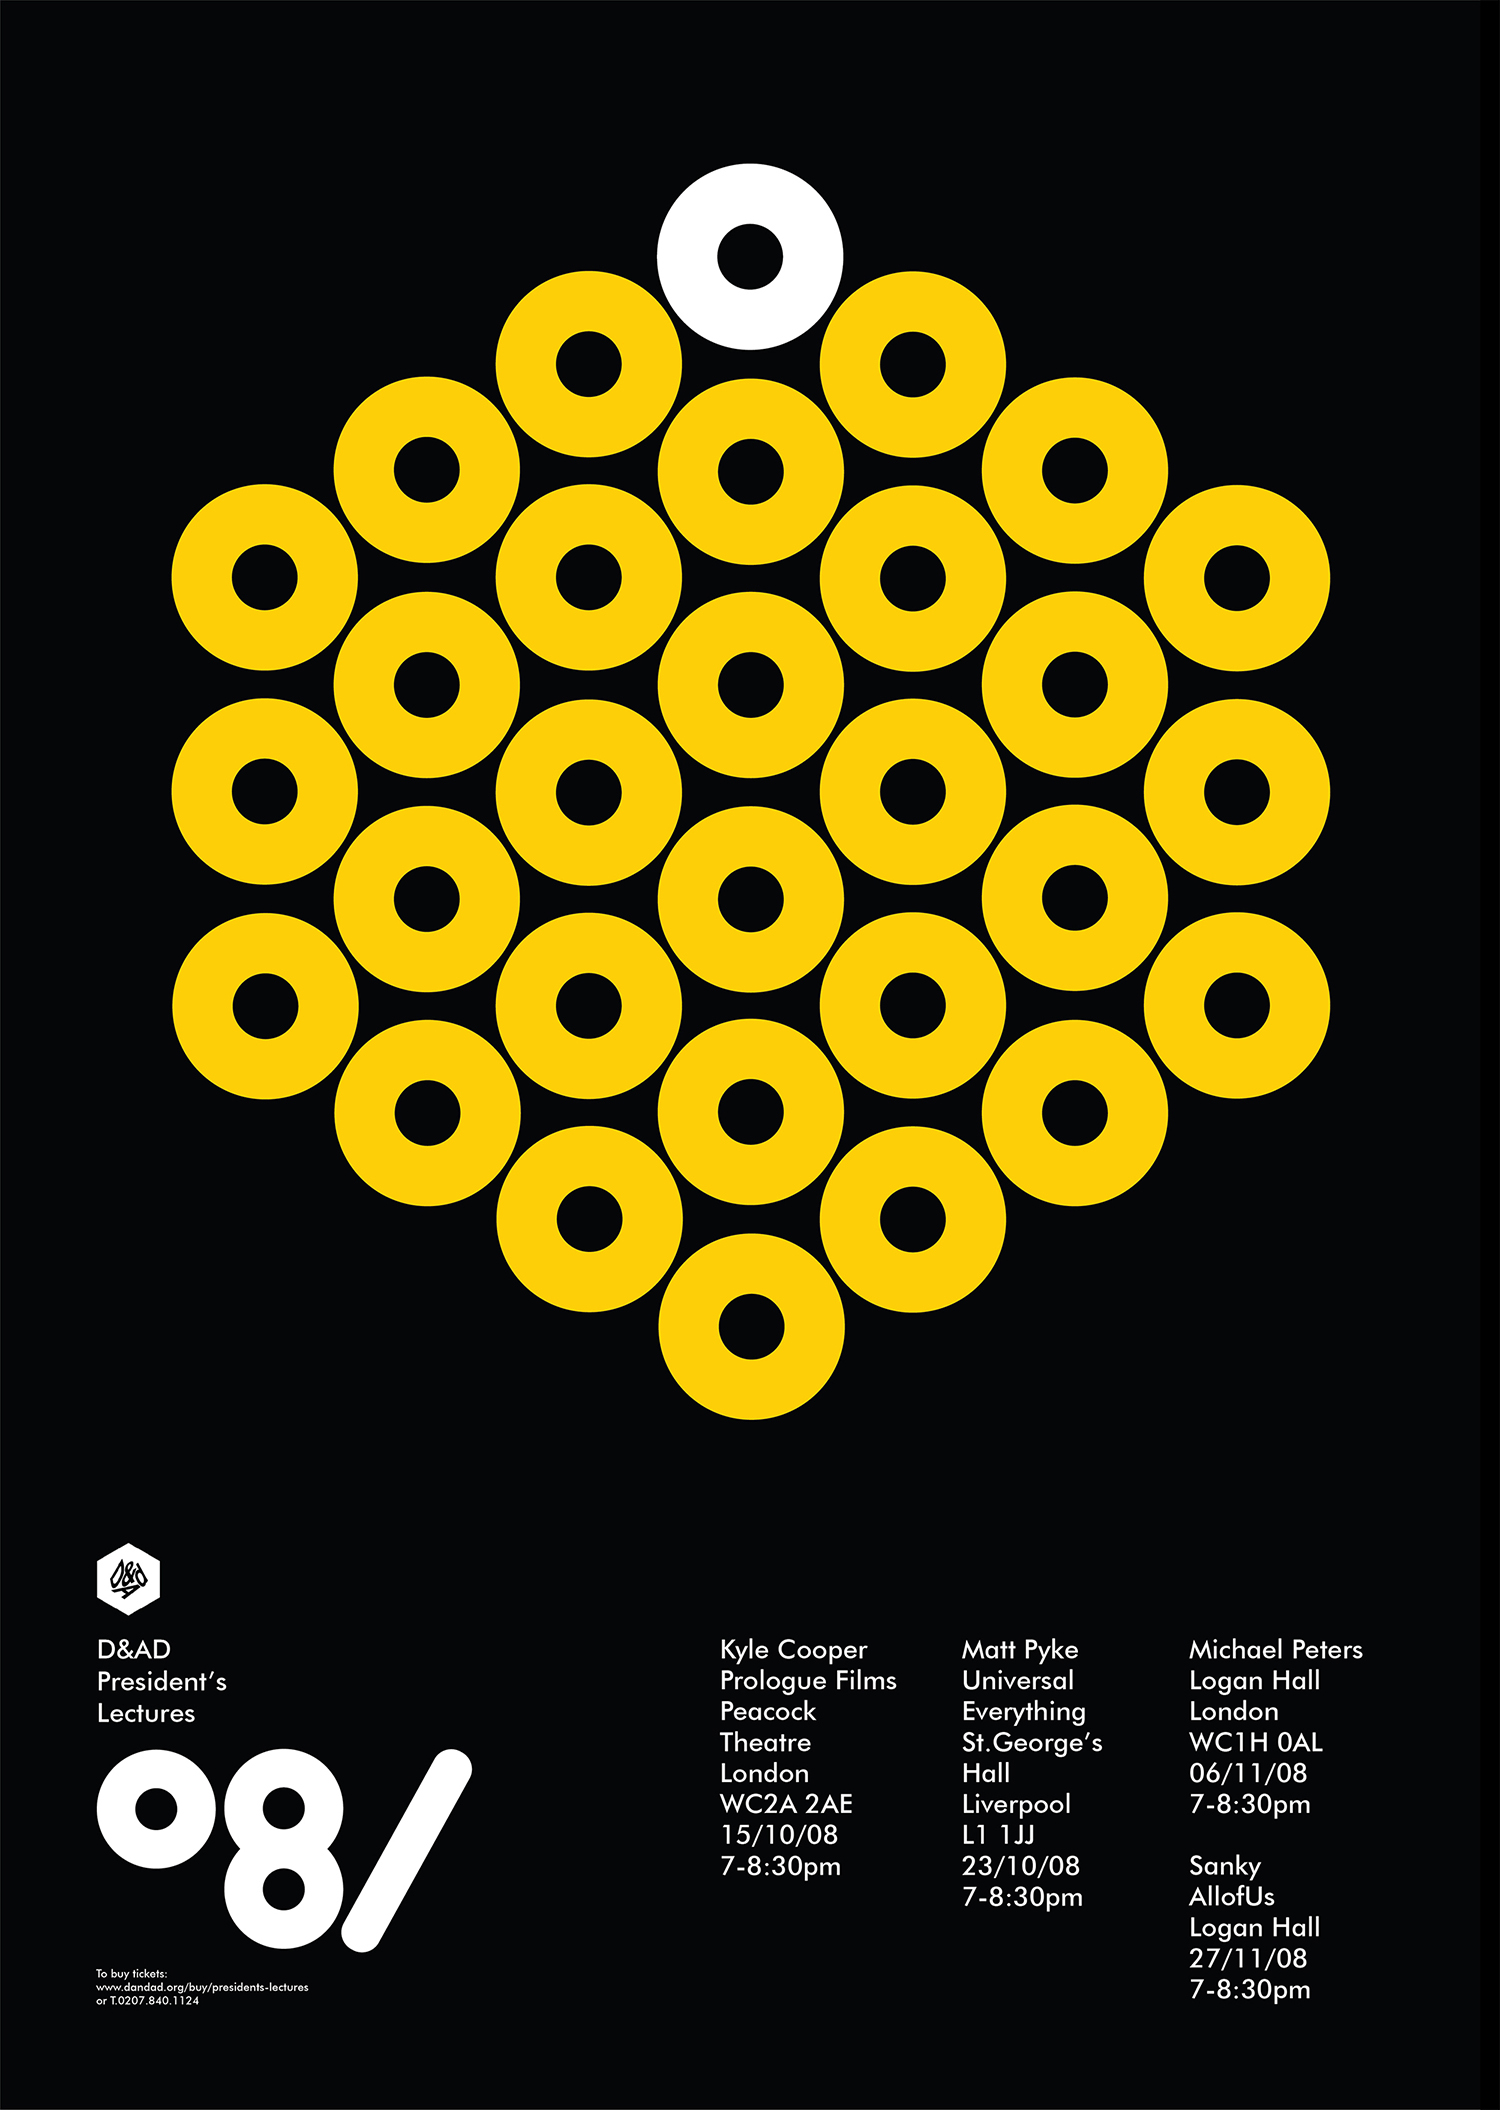 Poster by Peter Saville